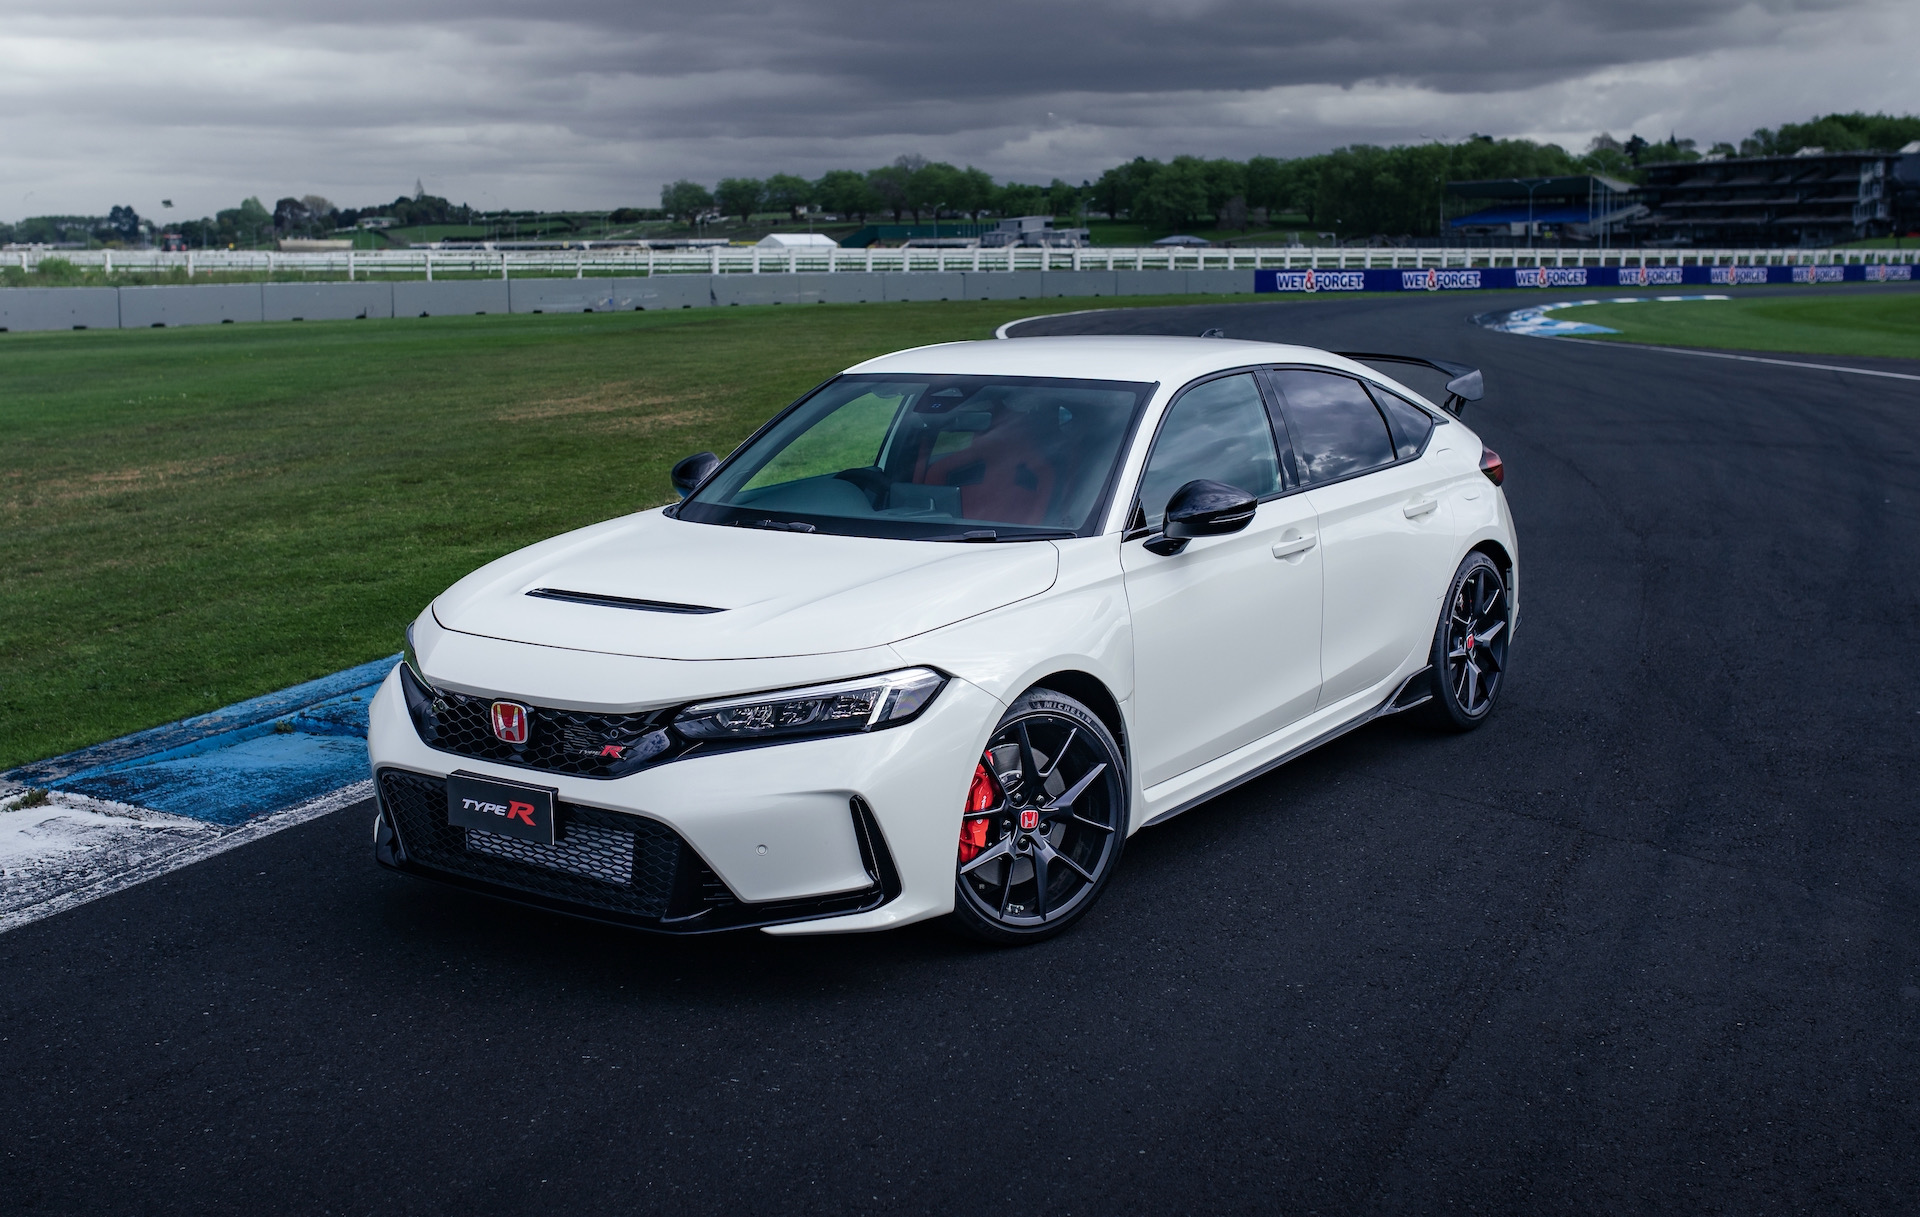 2023 Honda Civic Type R on sale in Australia from $72,600